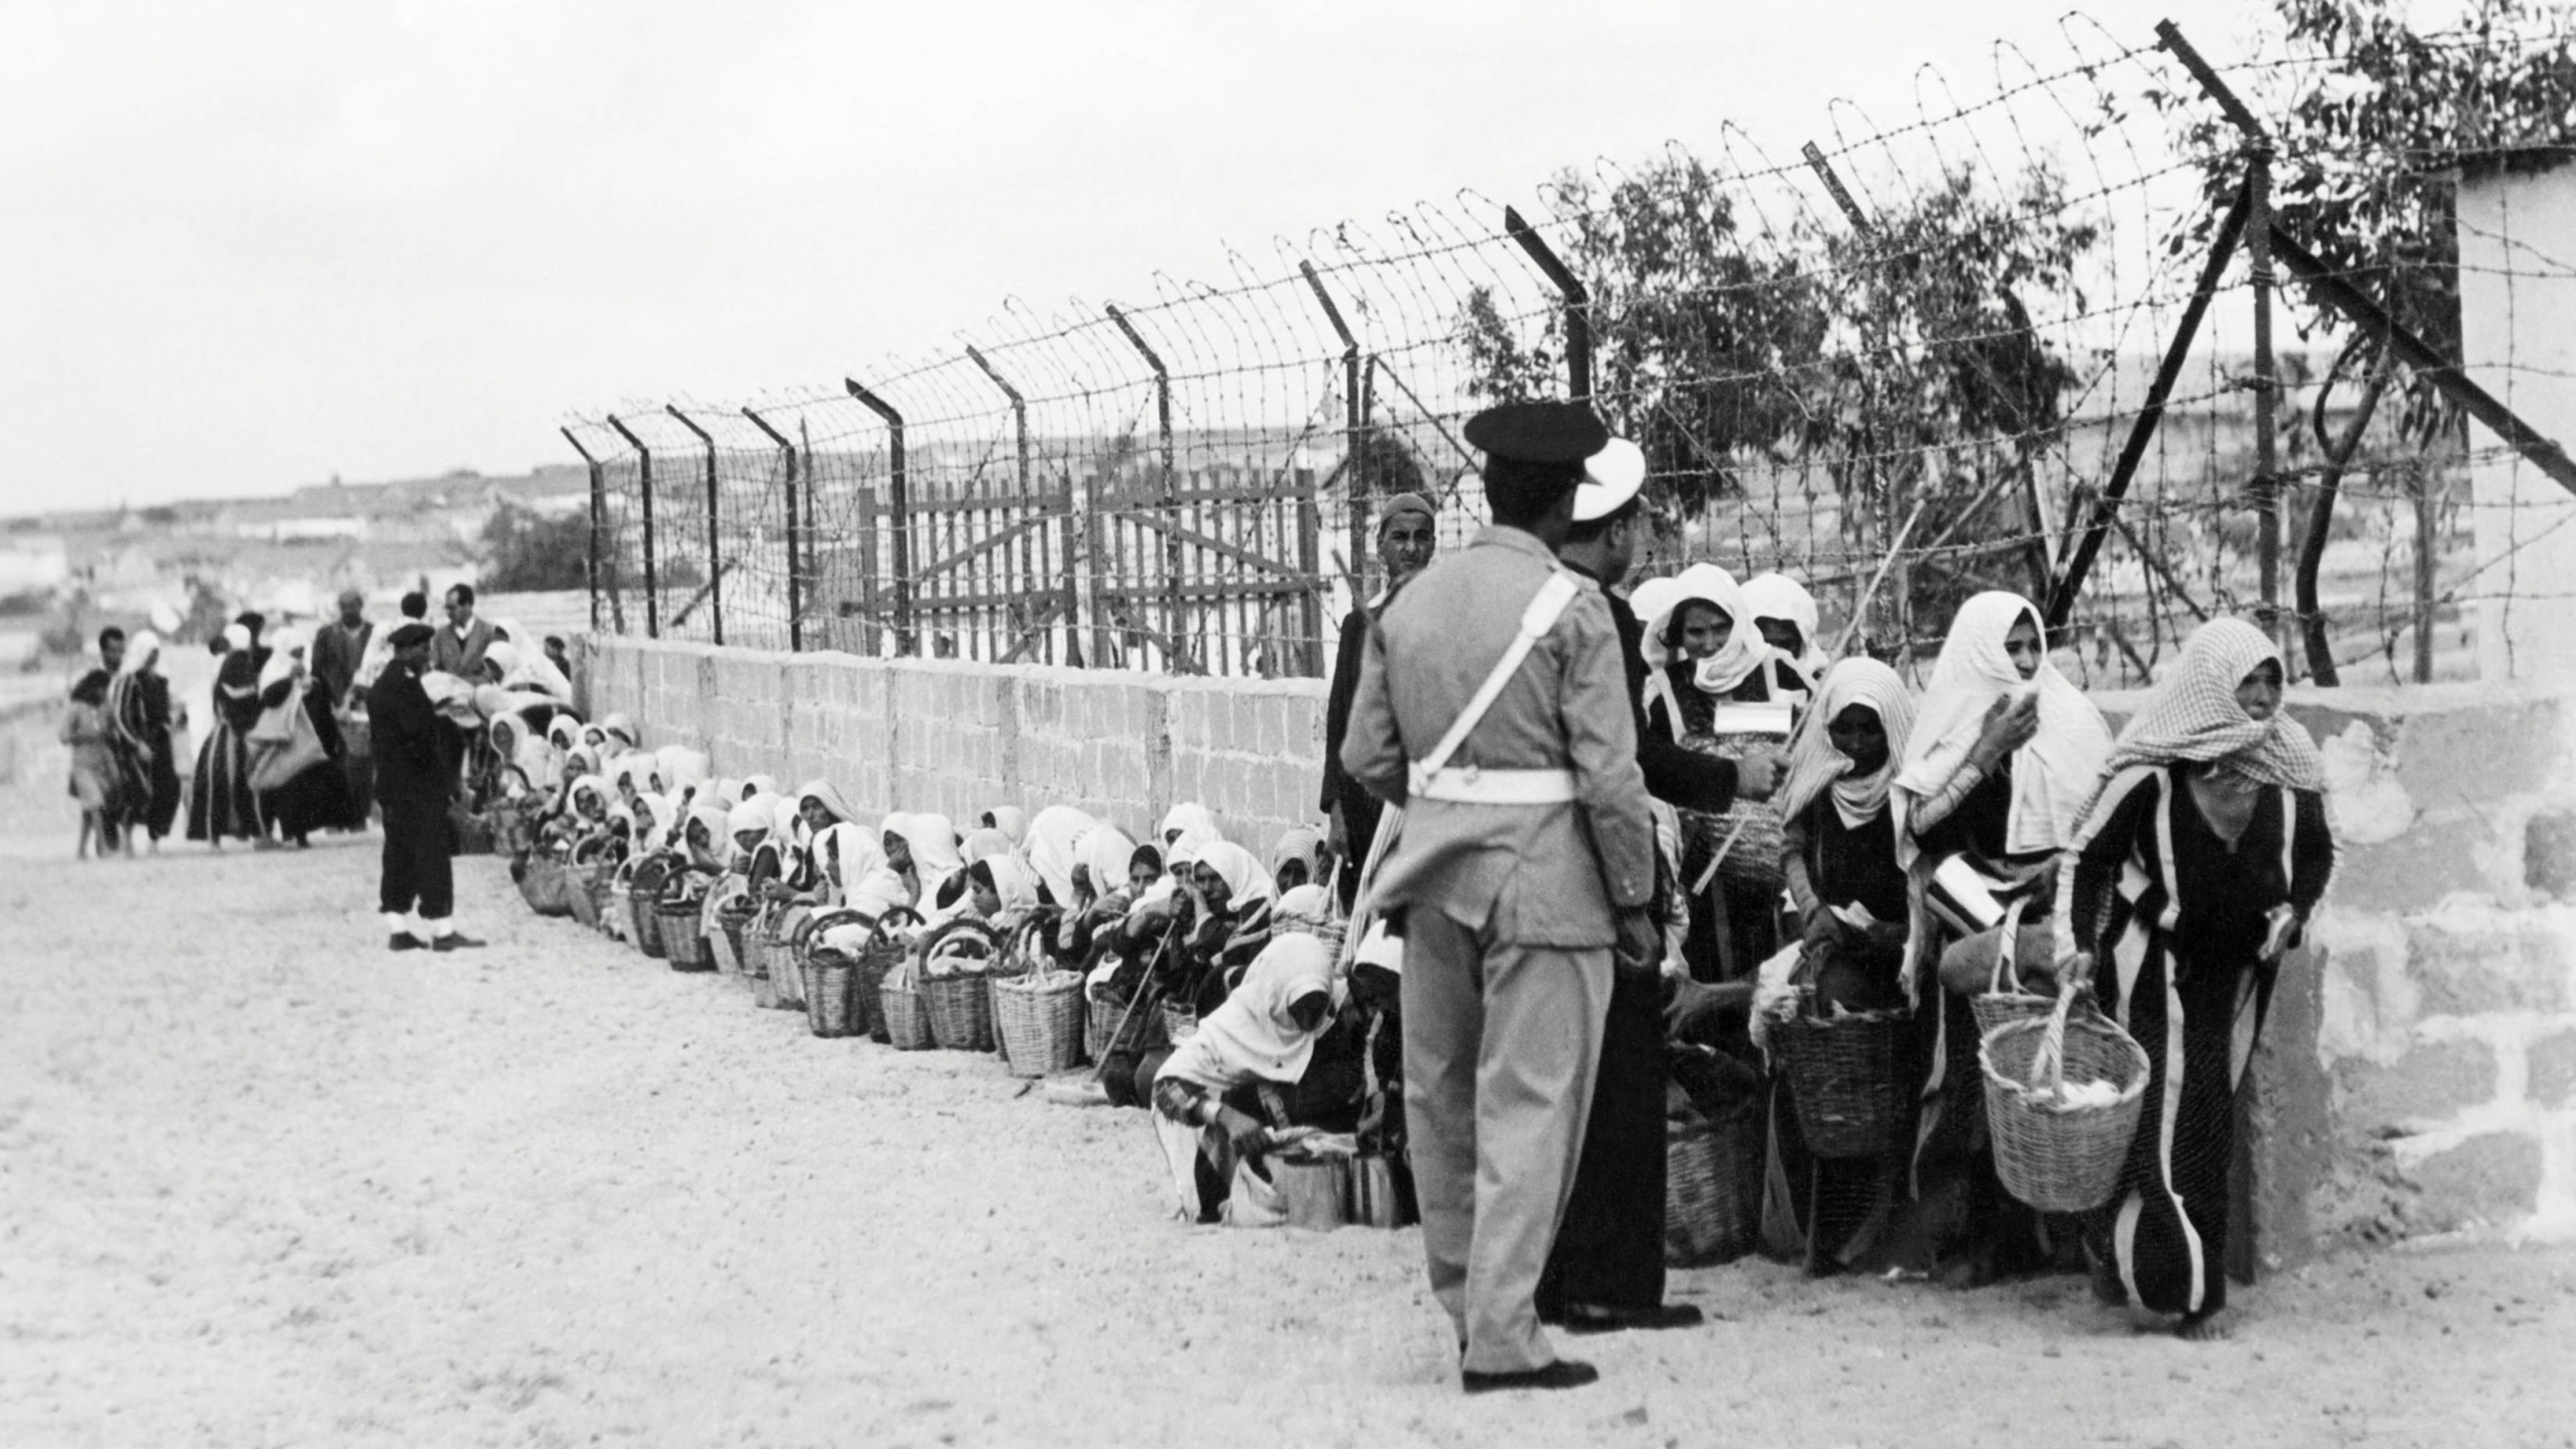 Palestinian refugees queue for food distributed by UNRWA at a camp in Gaza, 9 November 1956 (AFP/Rene Jarland)